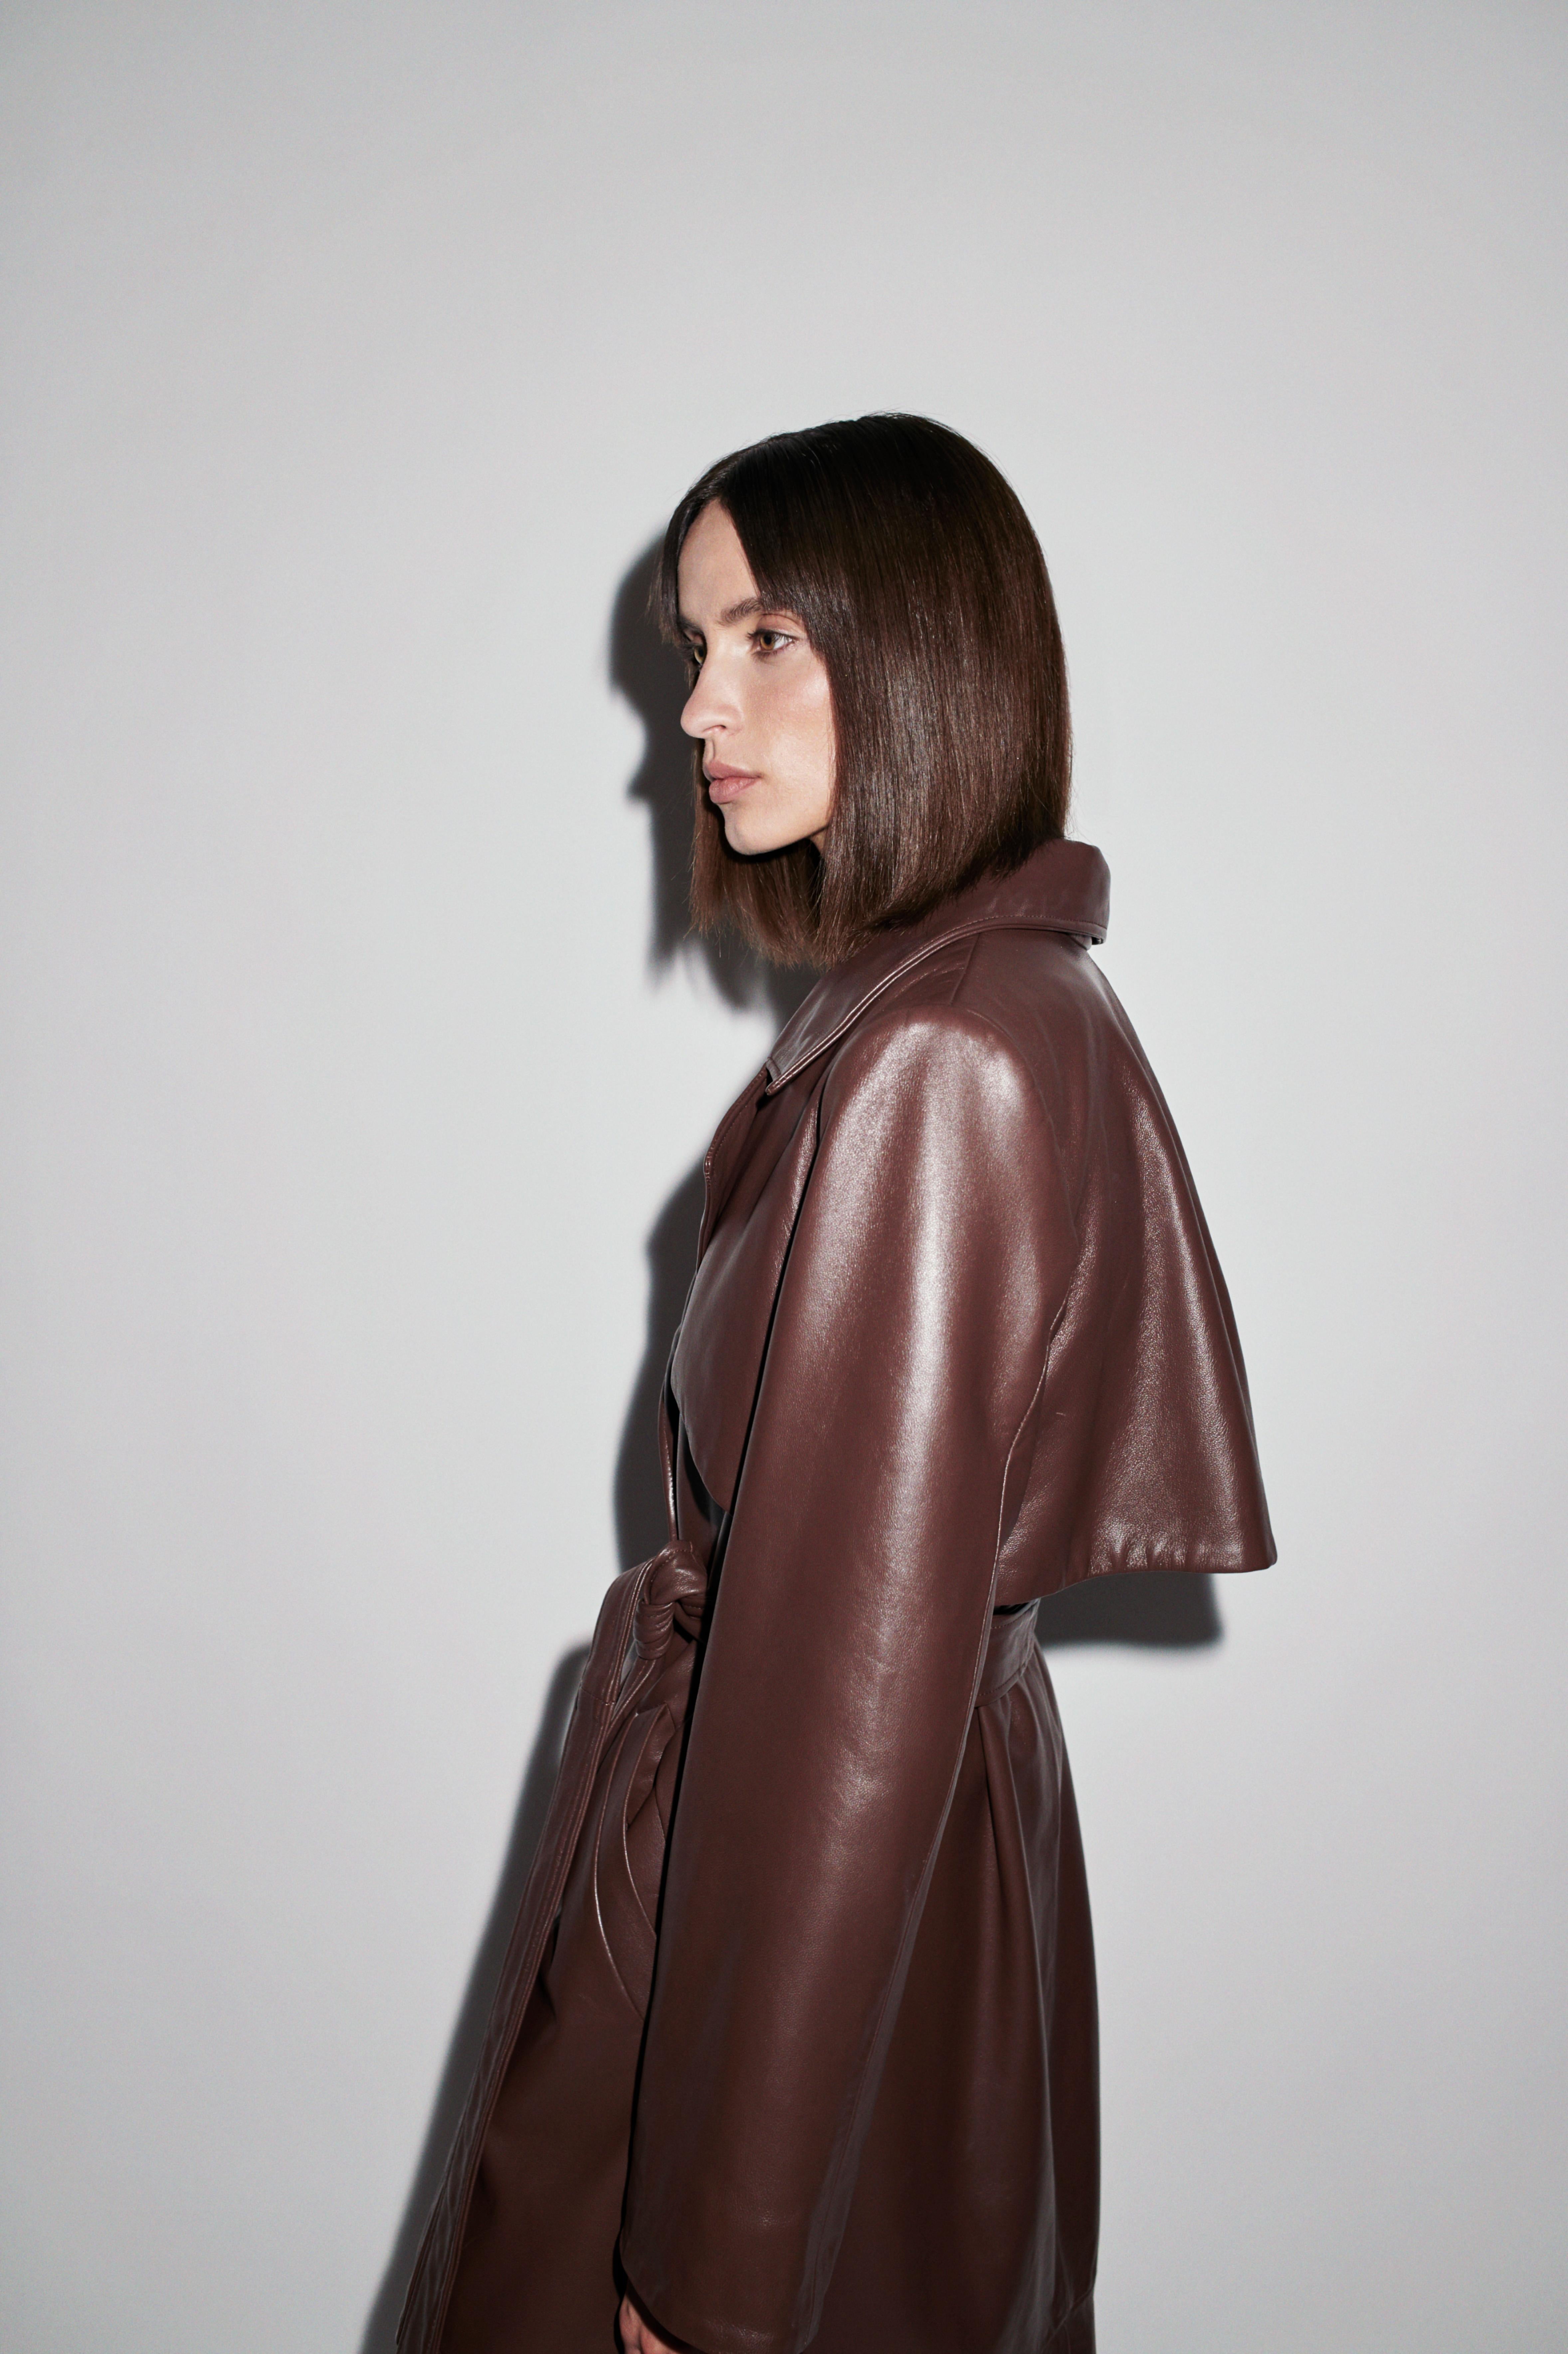 Black Verheyen London Leather Trench Coat in Chocolate Brown - Size uk 8 For Sale